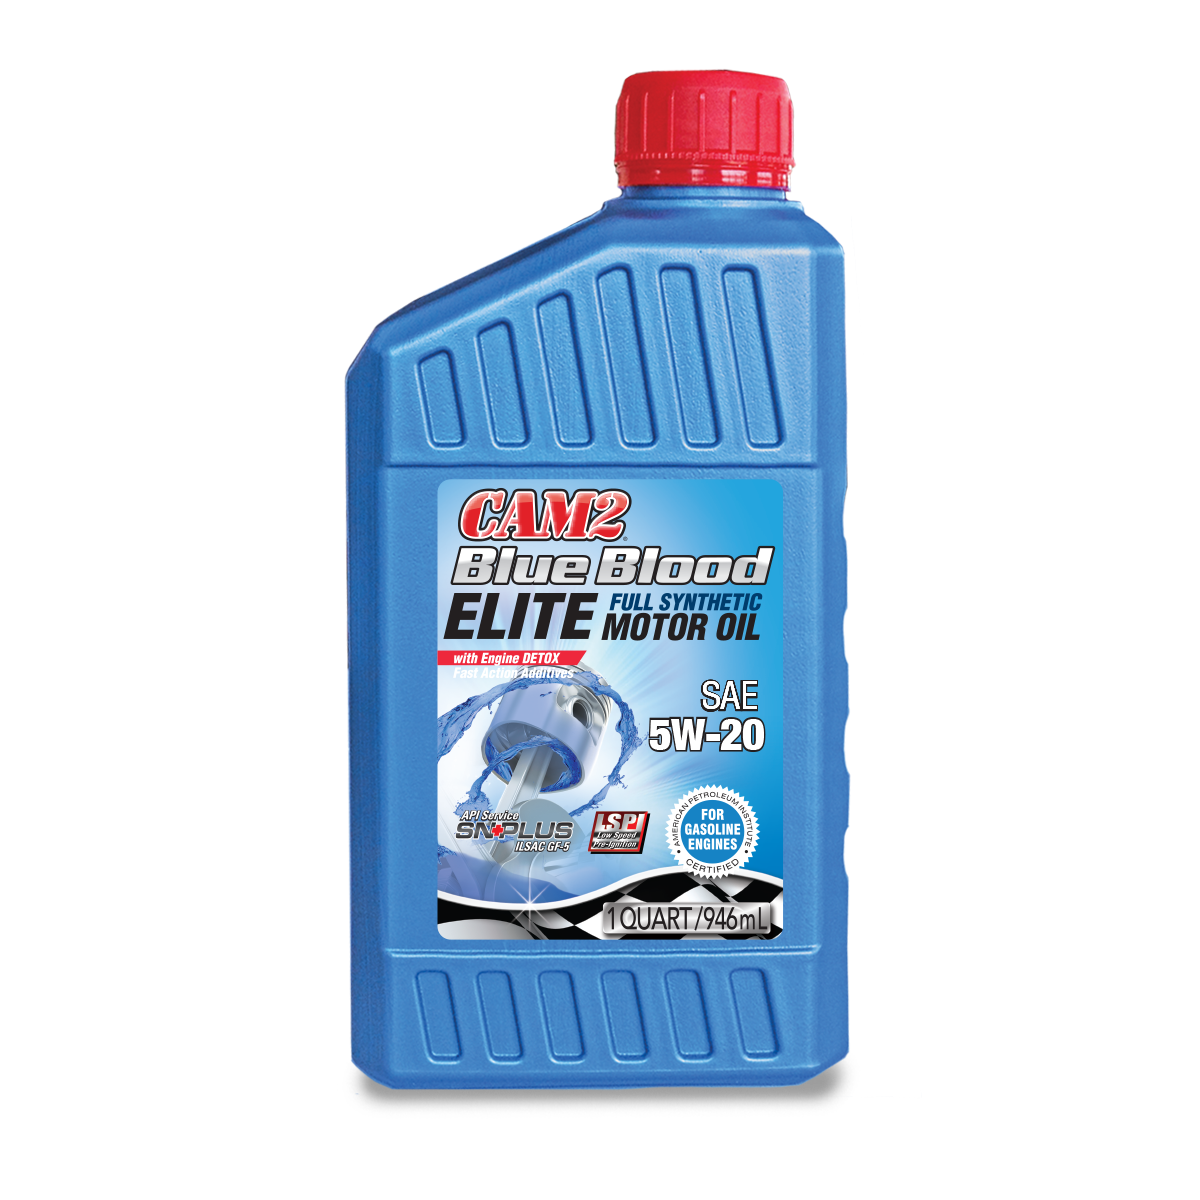 CAM2 BLUE BLOOD ELITE 5W-20 SN PLUS FULL SYNTHETIC ENGINE OIL 80565-960